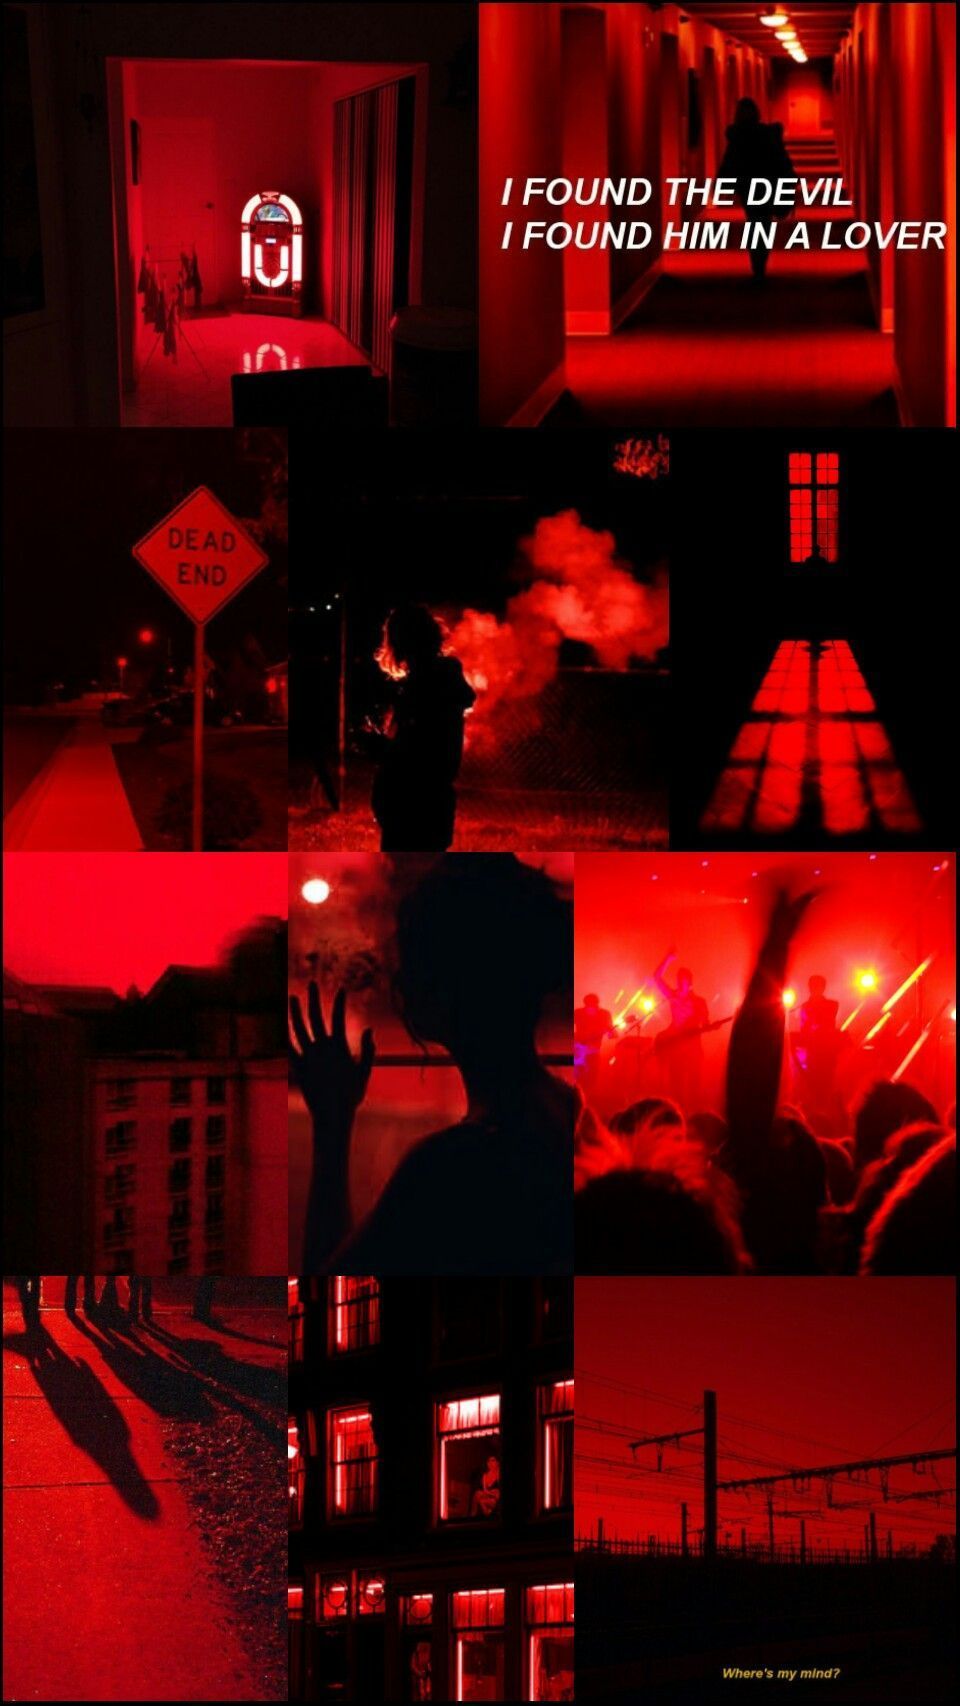 A collage of pictures with red lighting - Red, dark red, iPhone red, Virgo, Riverdale